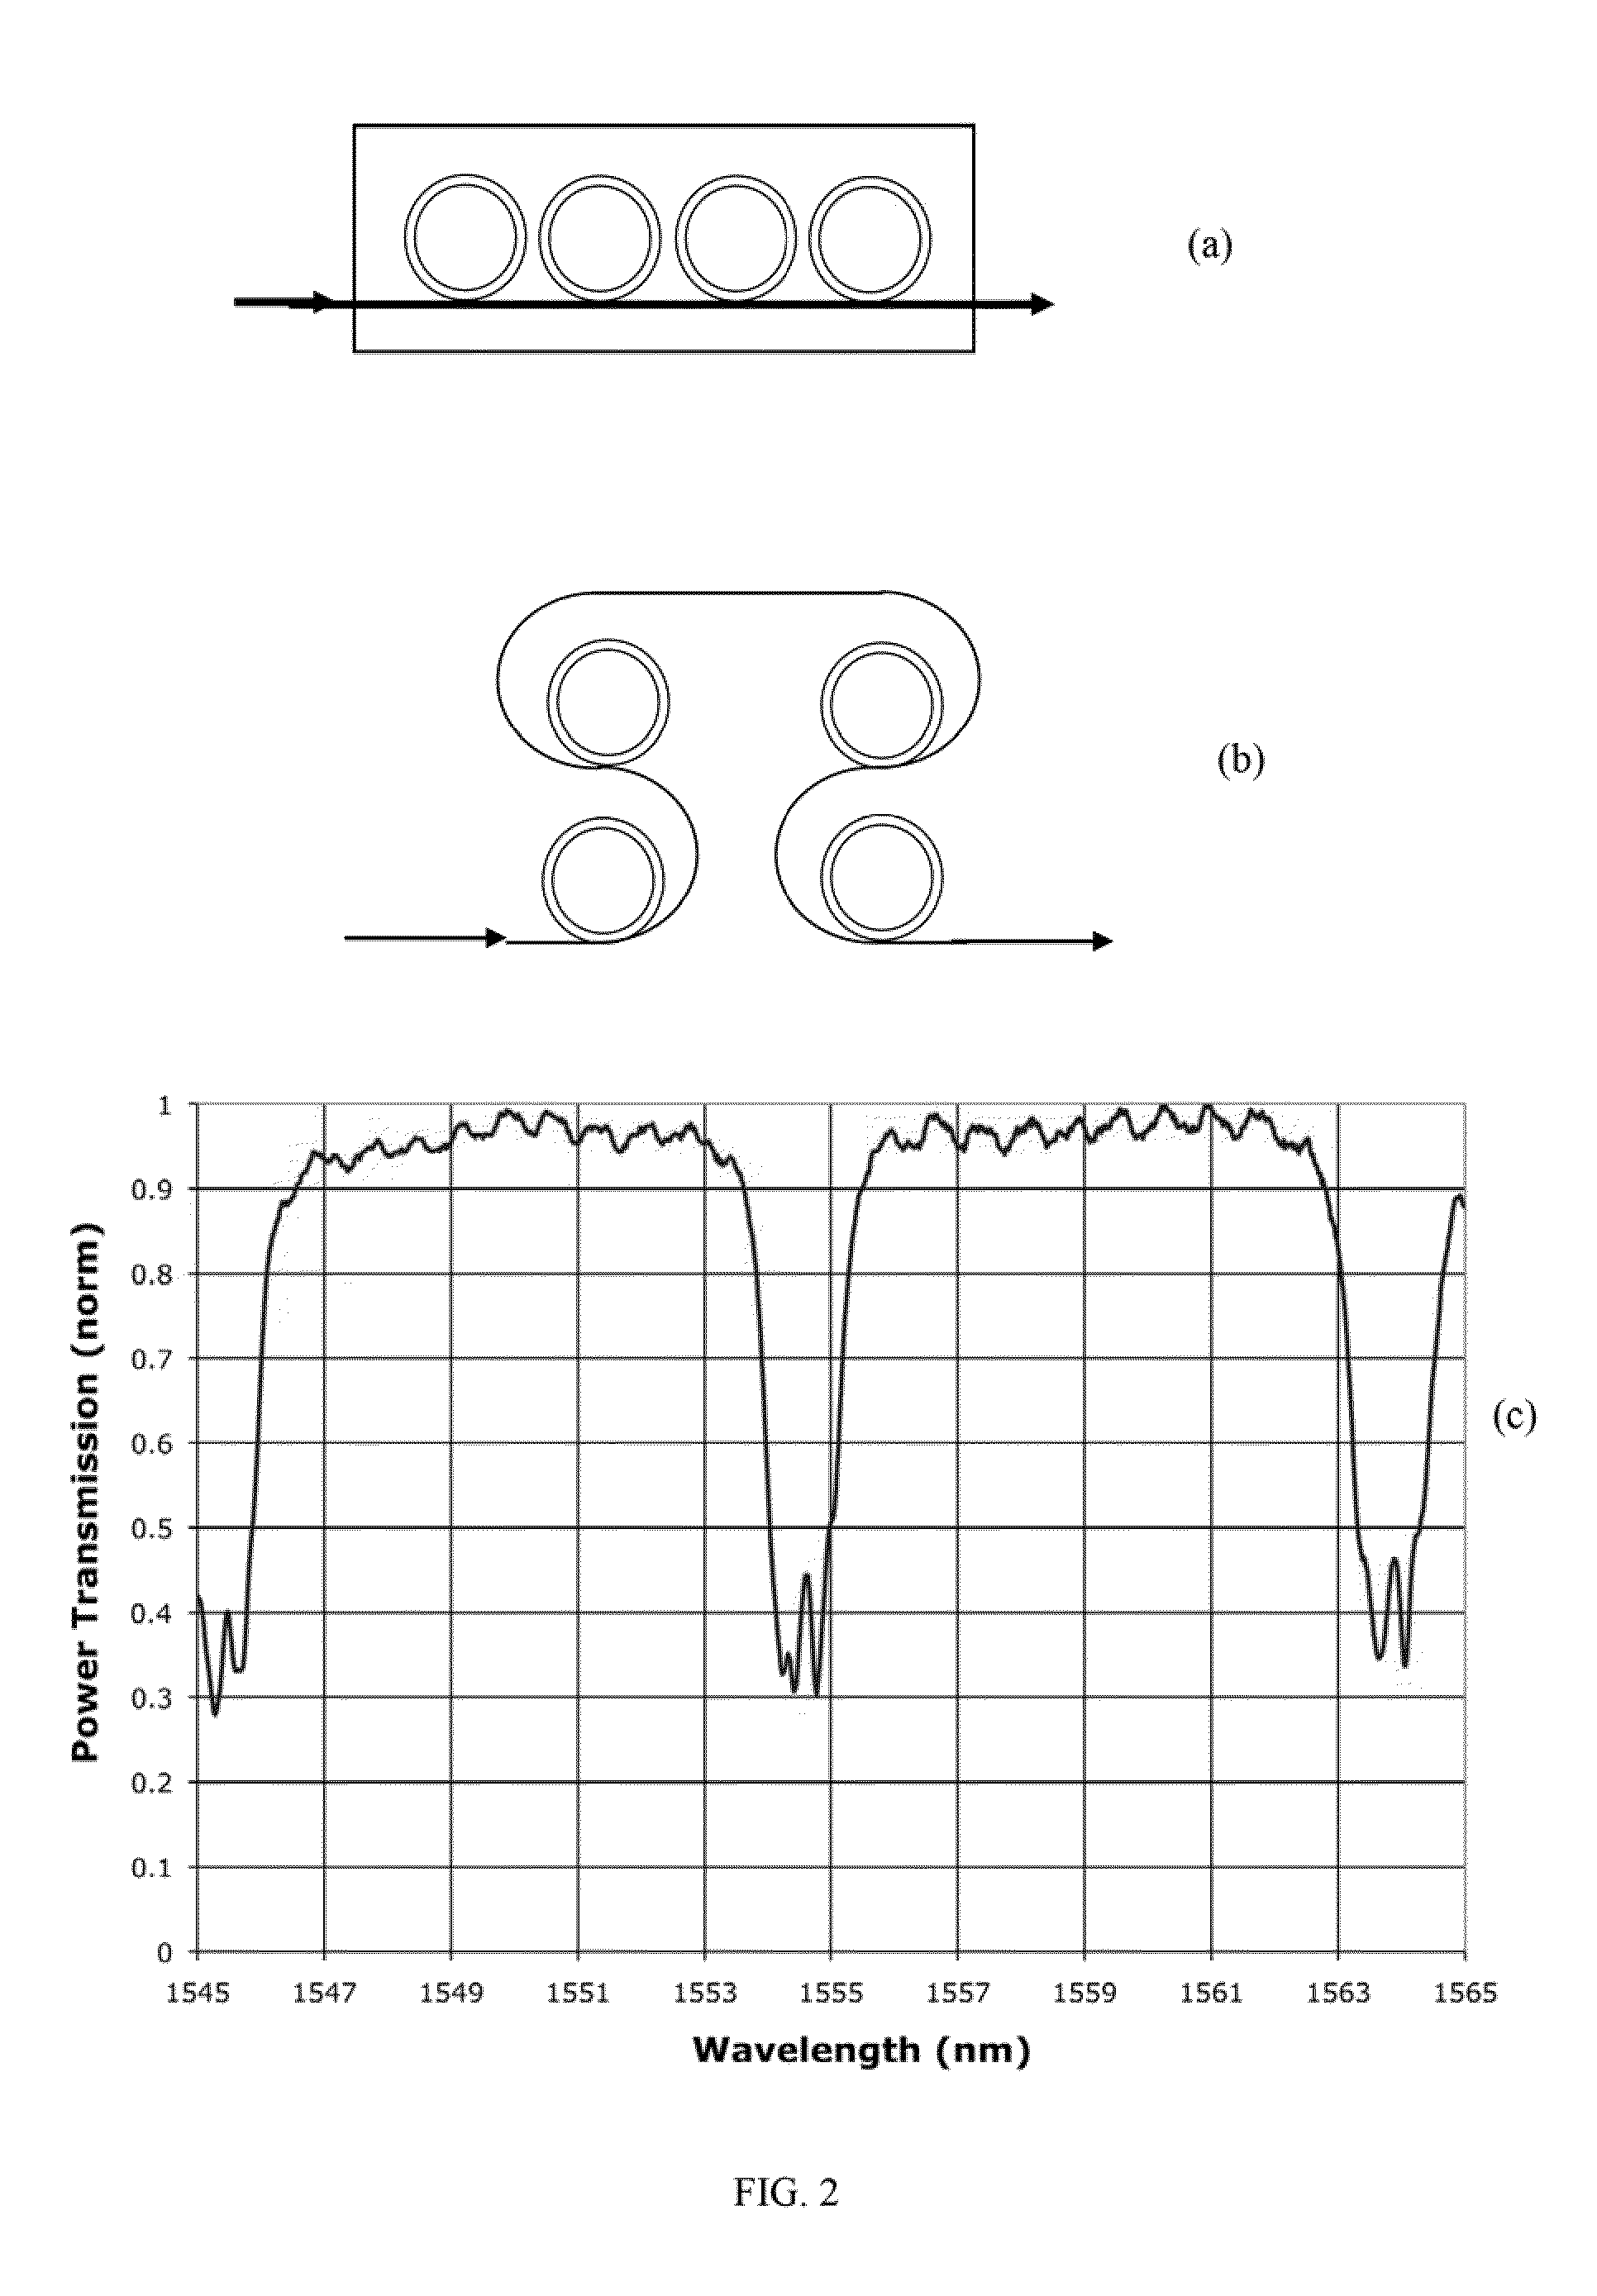 Super-ring resonator based devices